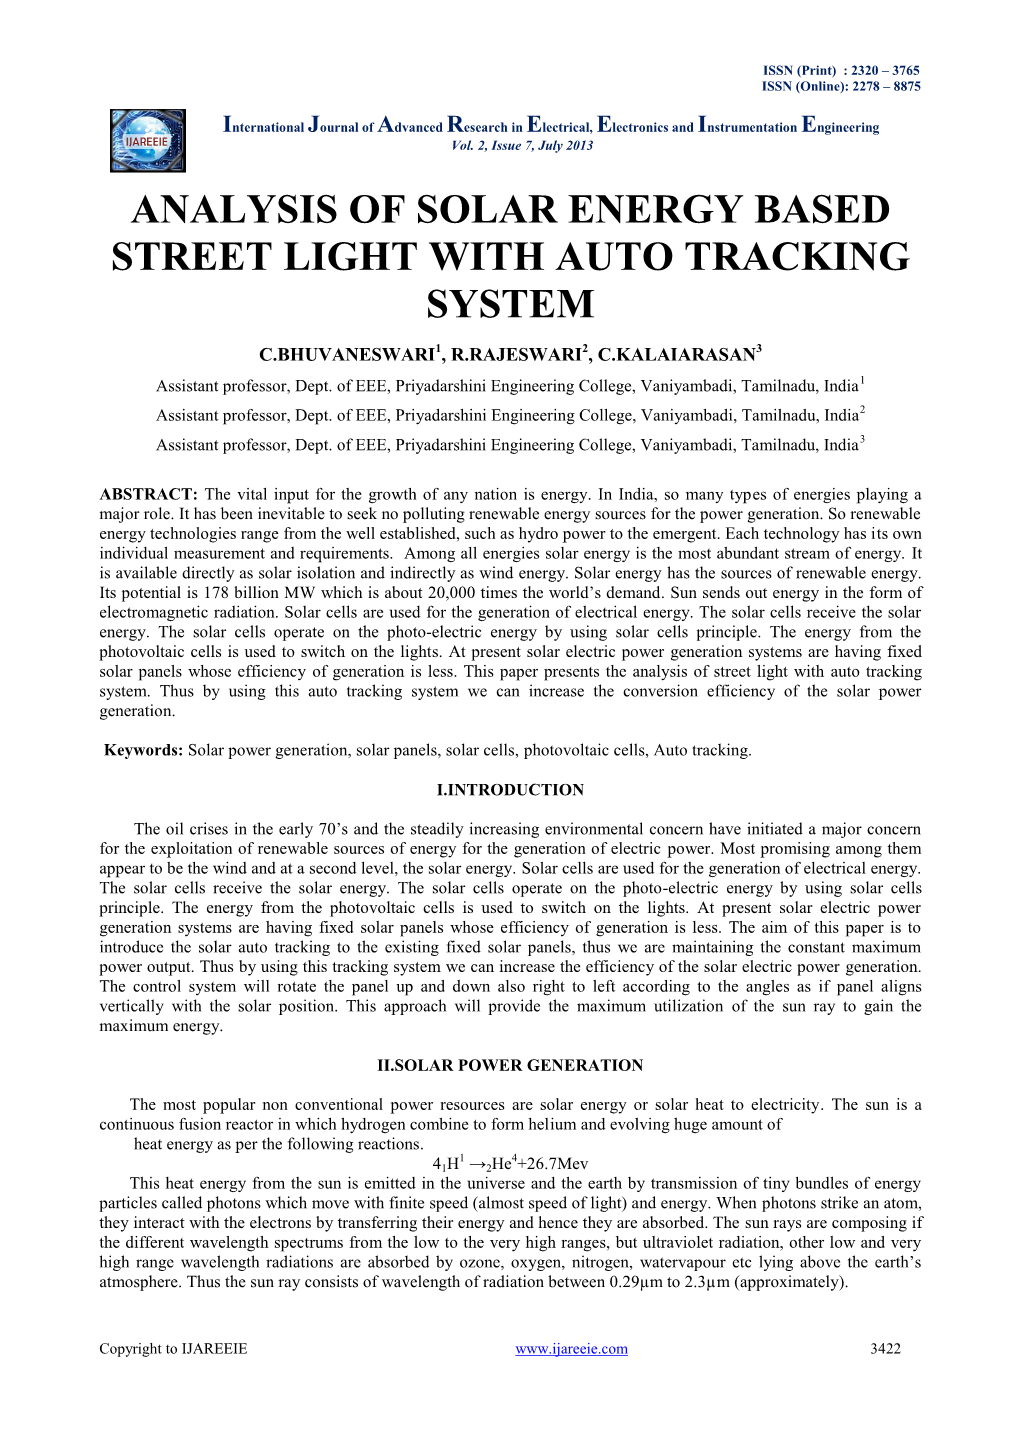 Analysis of Solar Energy Based Street Light with Auto Tracking System